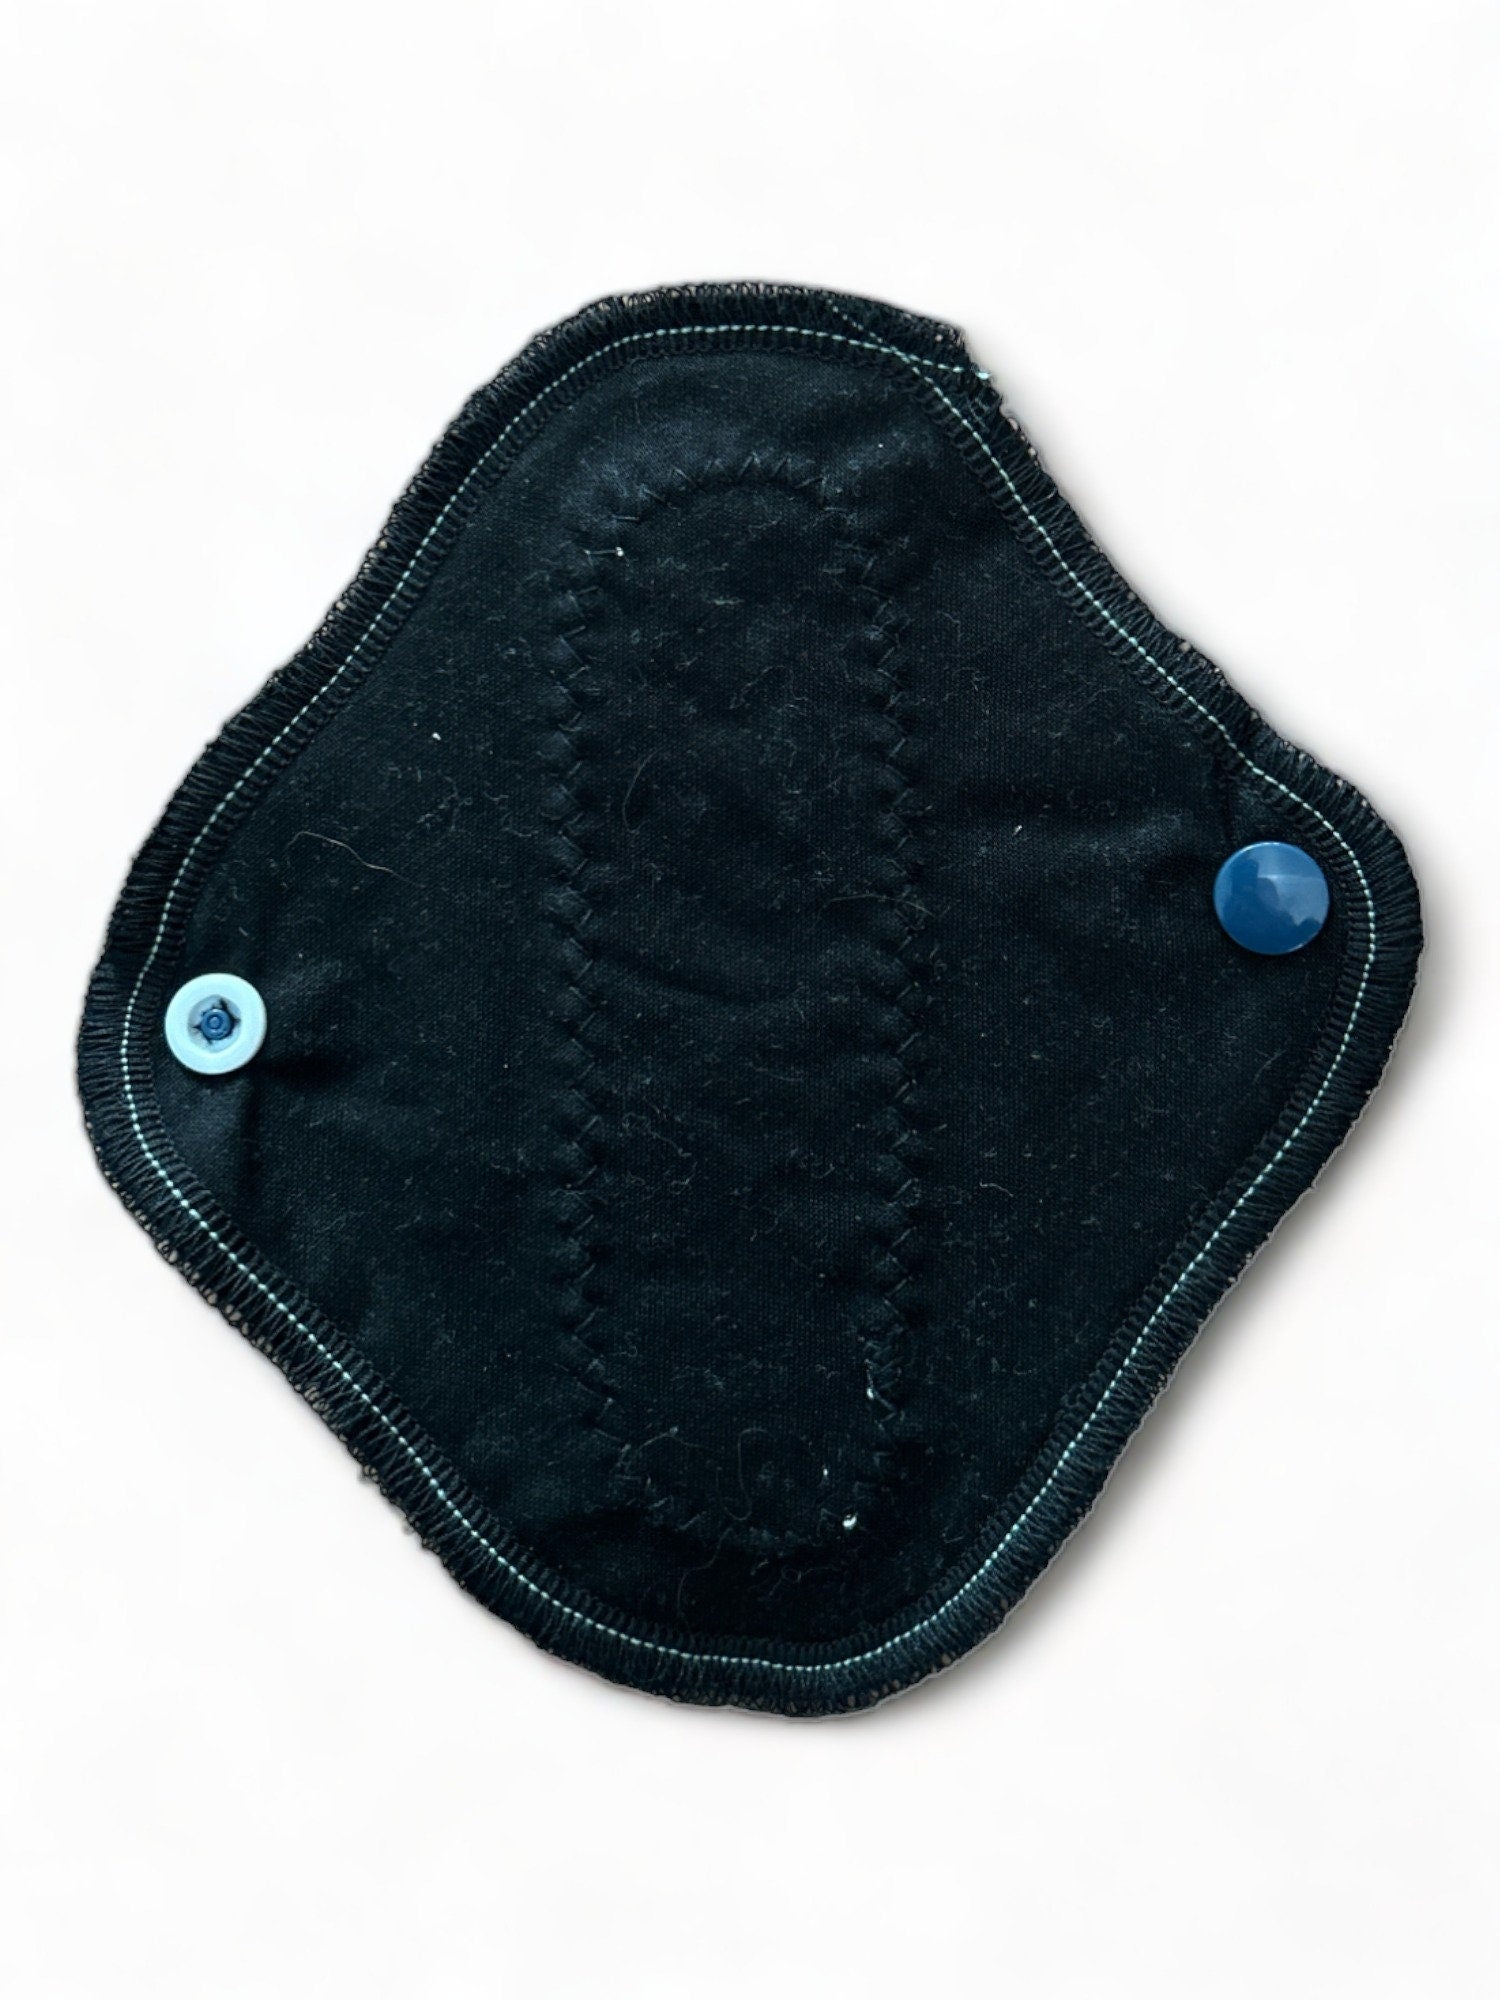 Reusable Cloth Pad (Liner) Light Absorbency - 6 inch